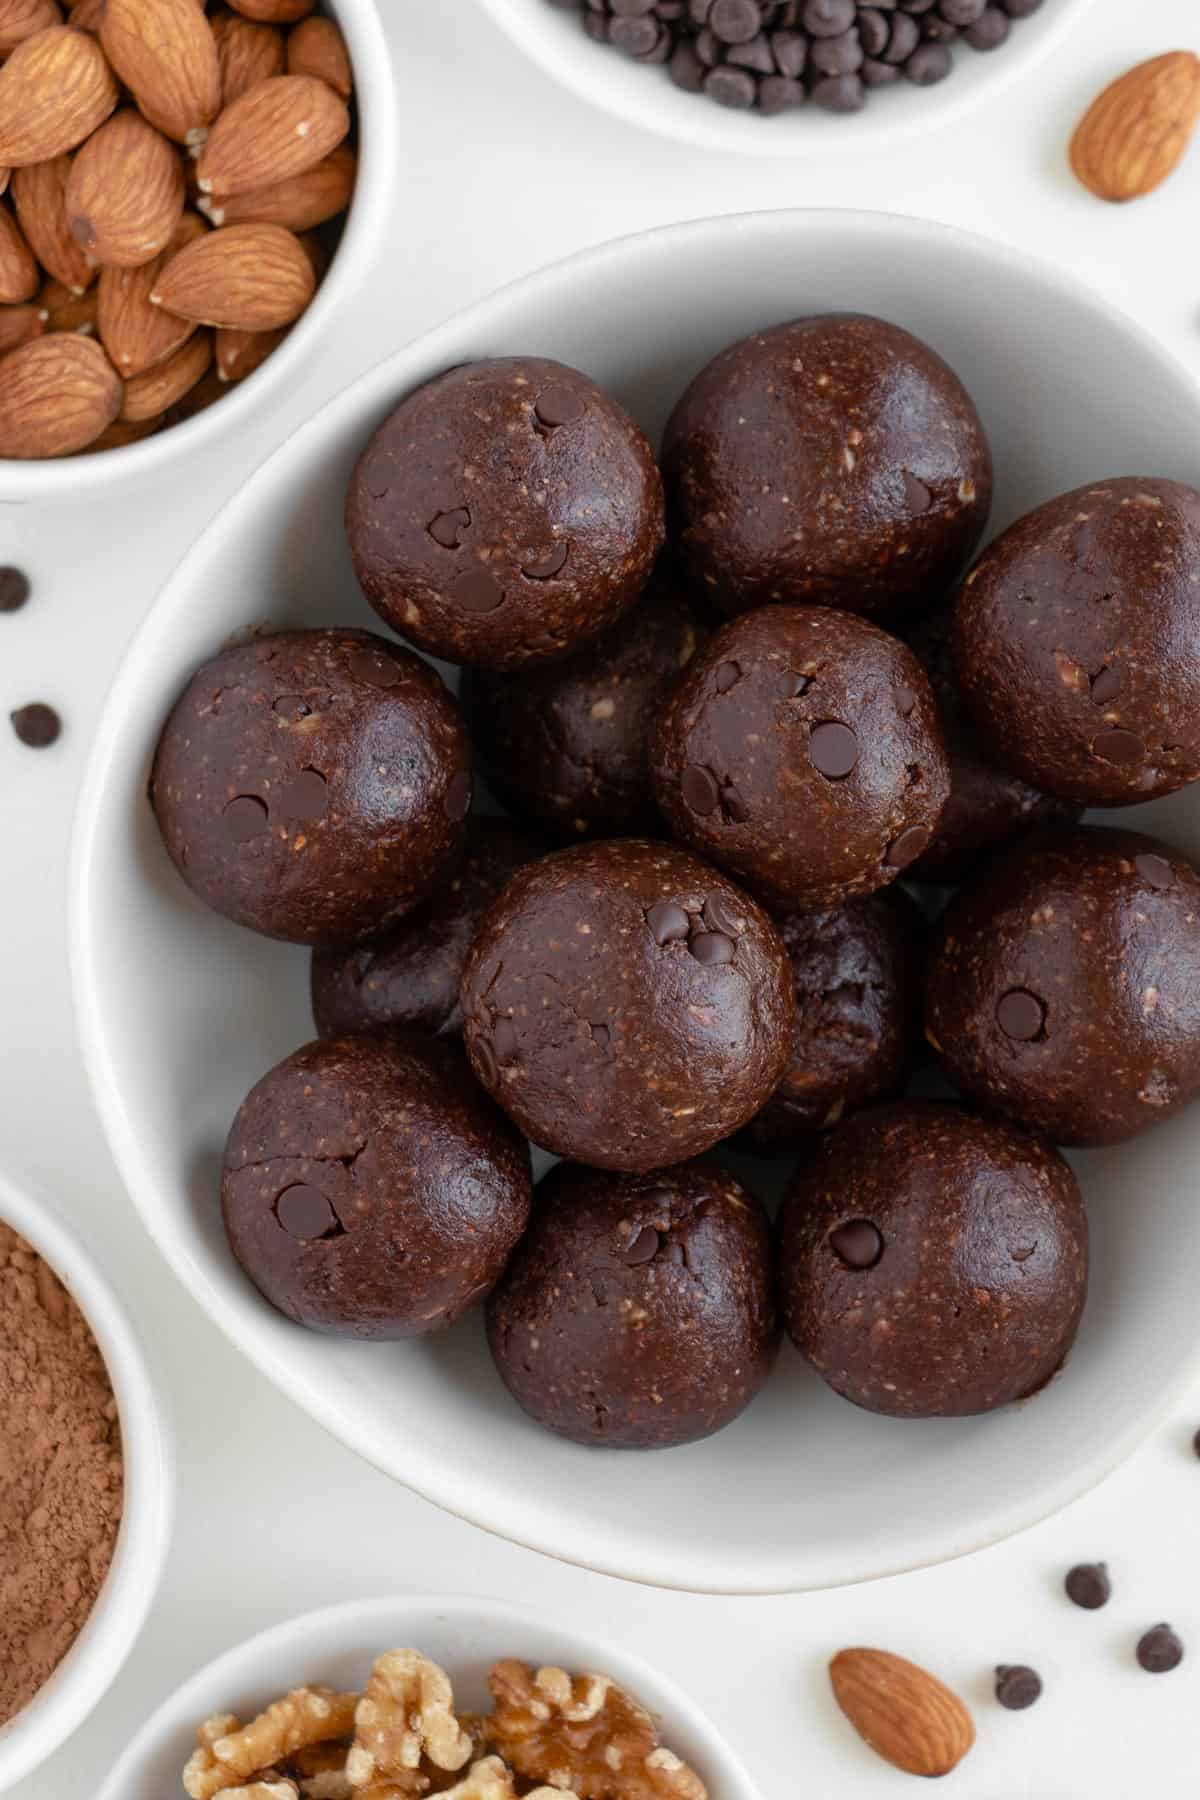 no bake brownie bites in a white bowl surrounded by almonds, chocolate chips, cacao powder, and walnuts